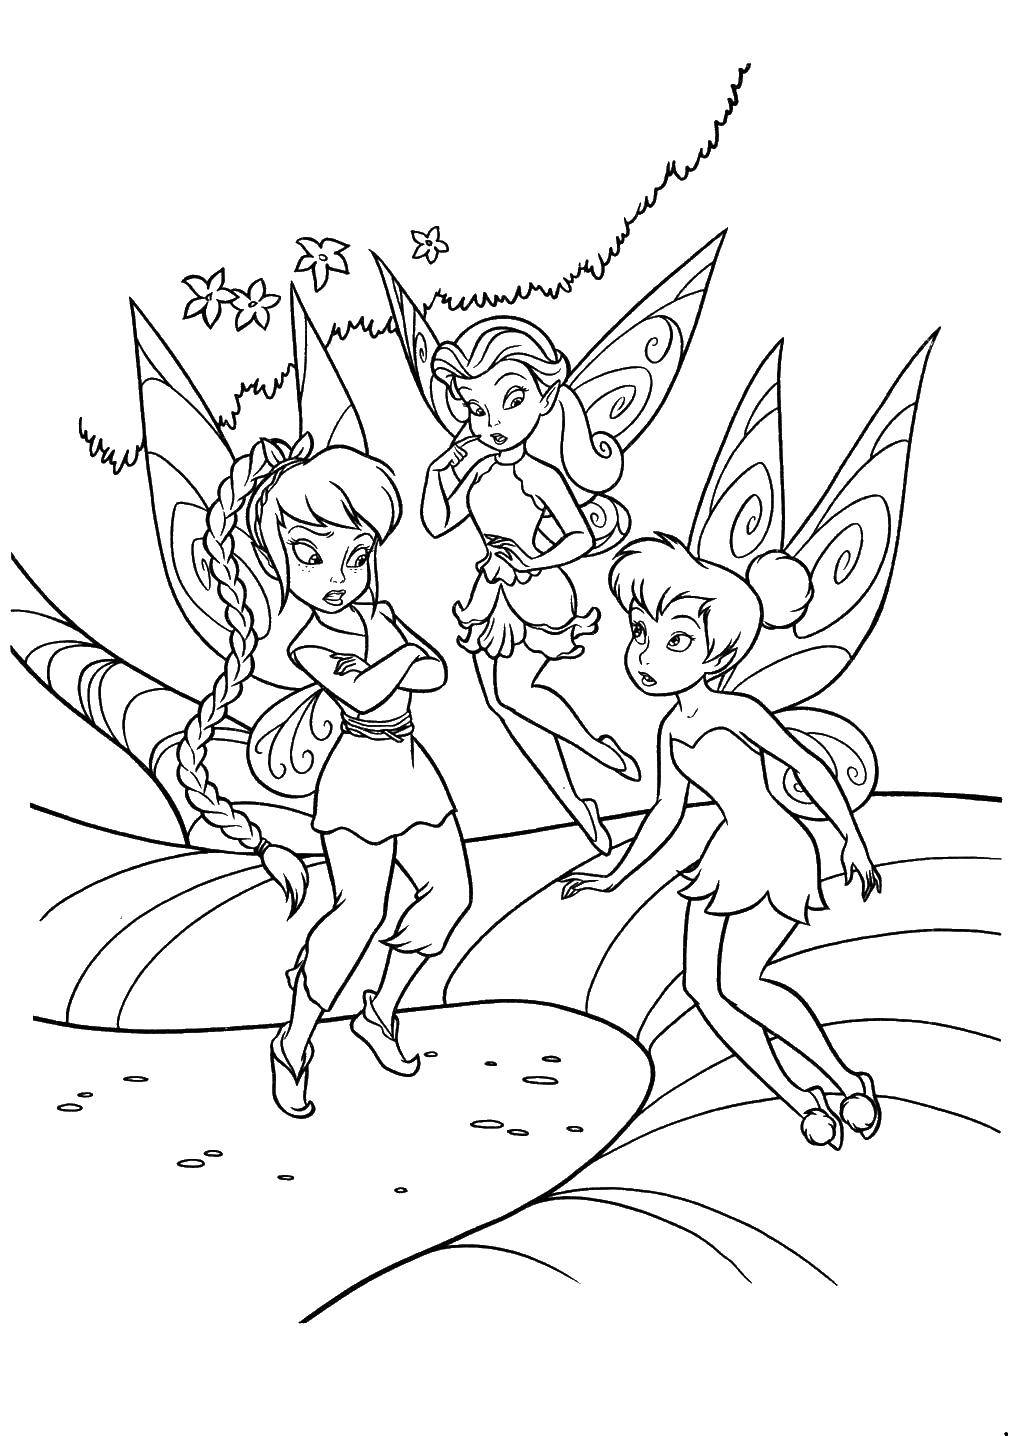 Coloring Tinker bell and her friends fairies. Category Ding , Ding Ding. Tags:  fairy, Tinker bell, vidia.